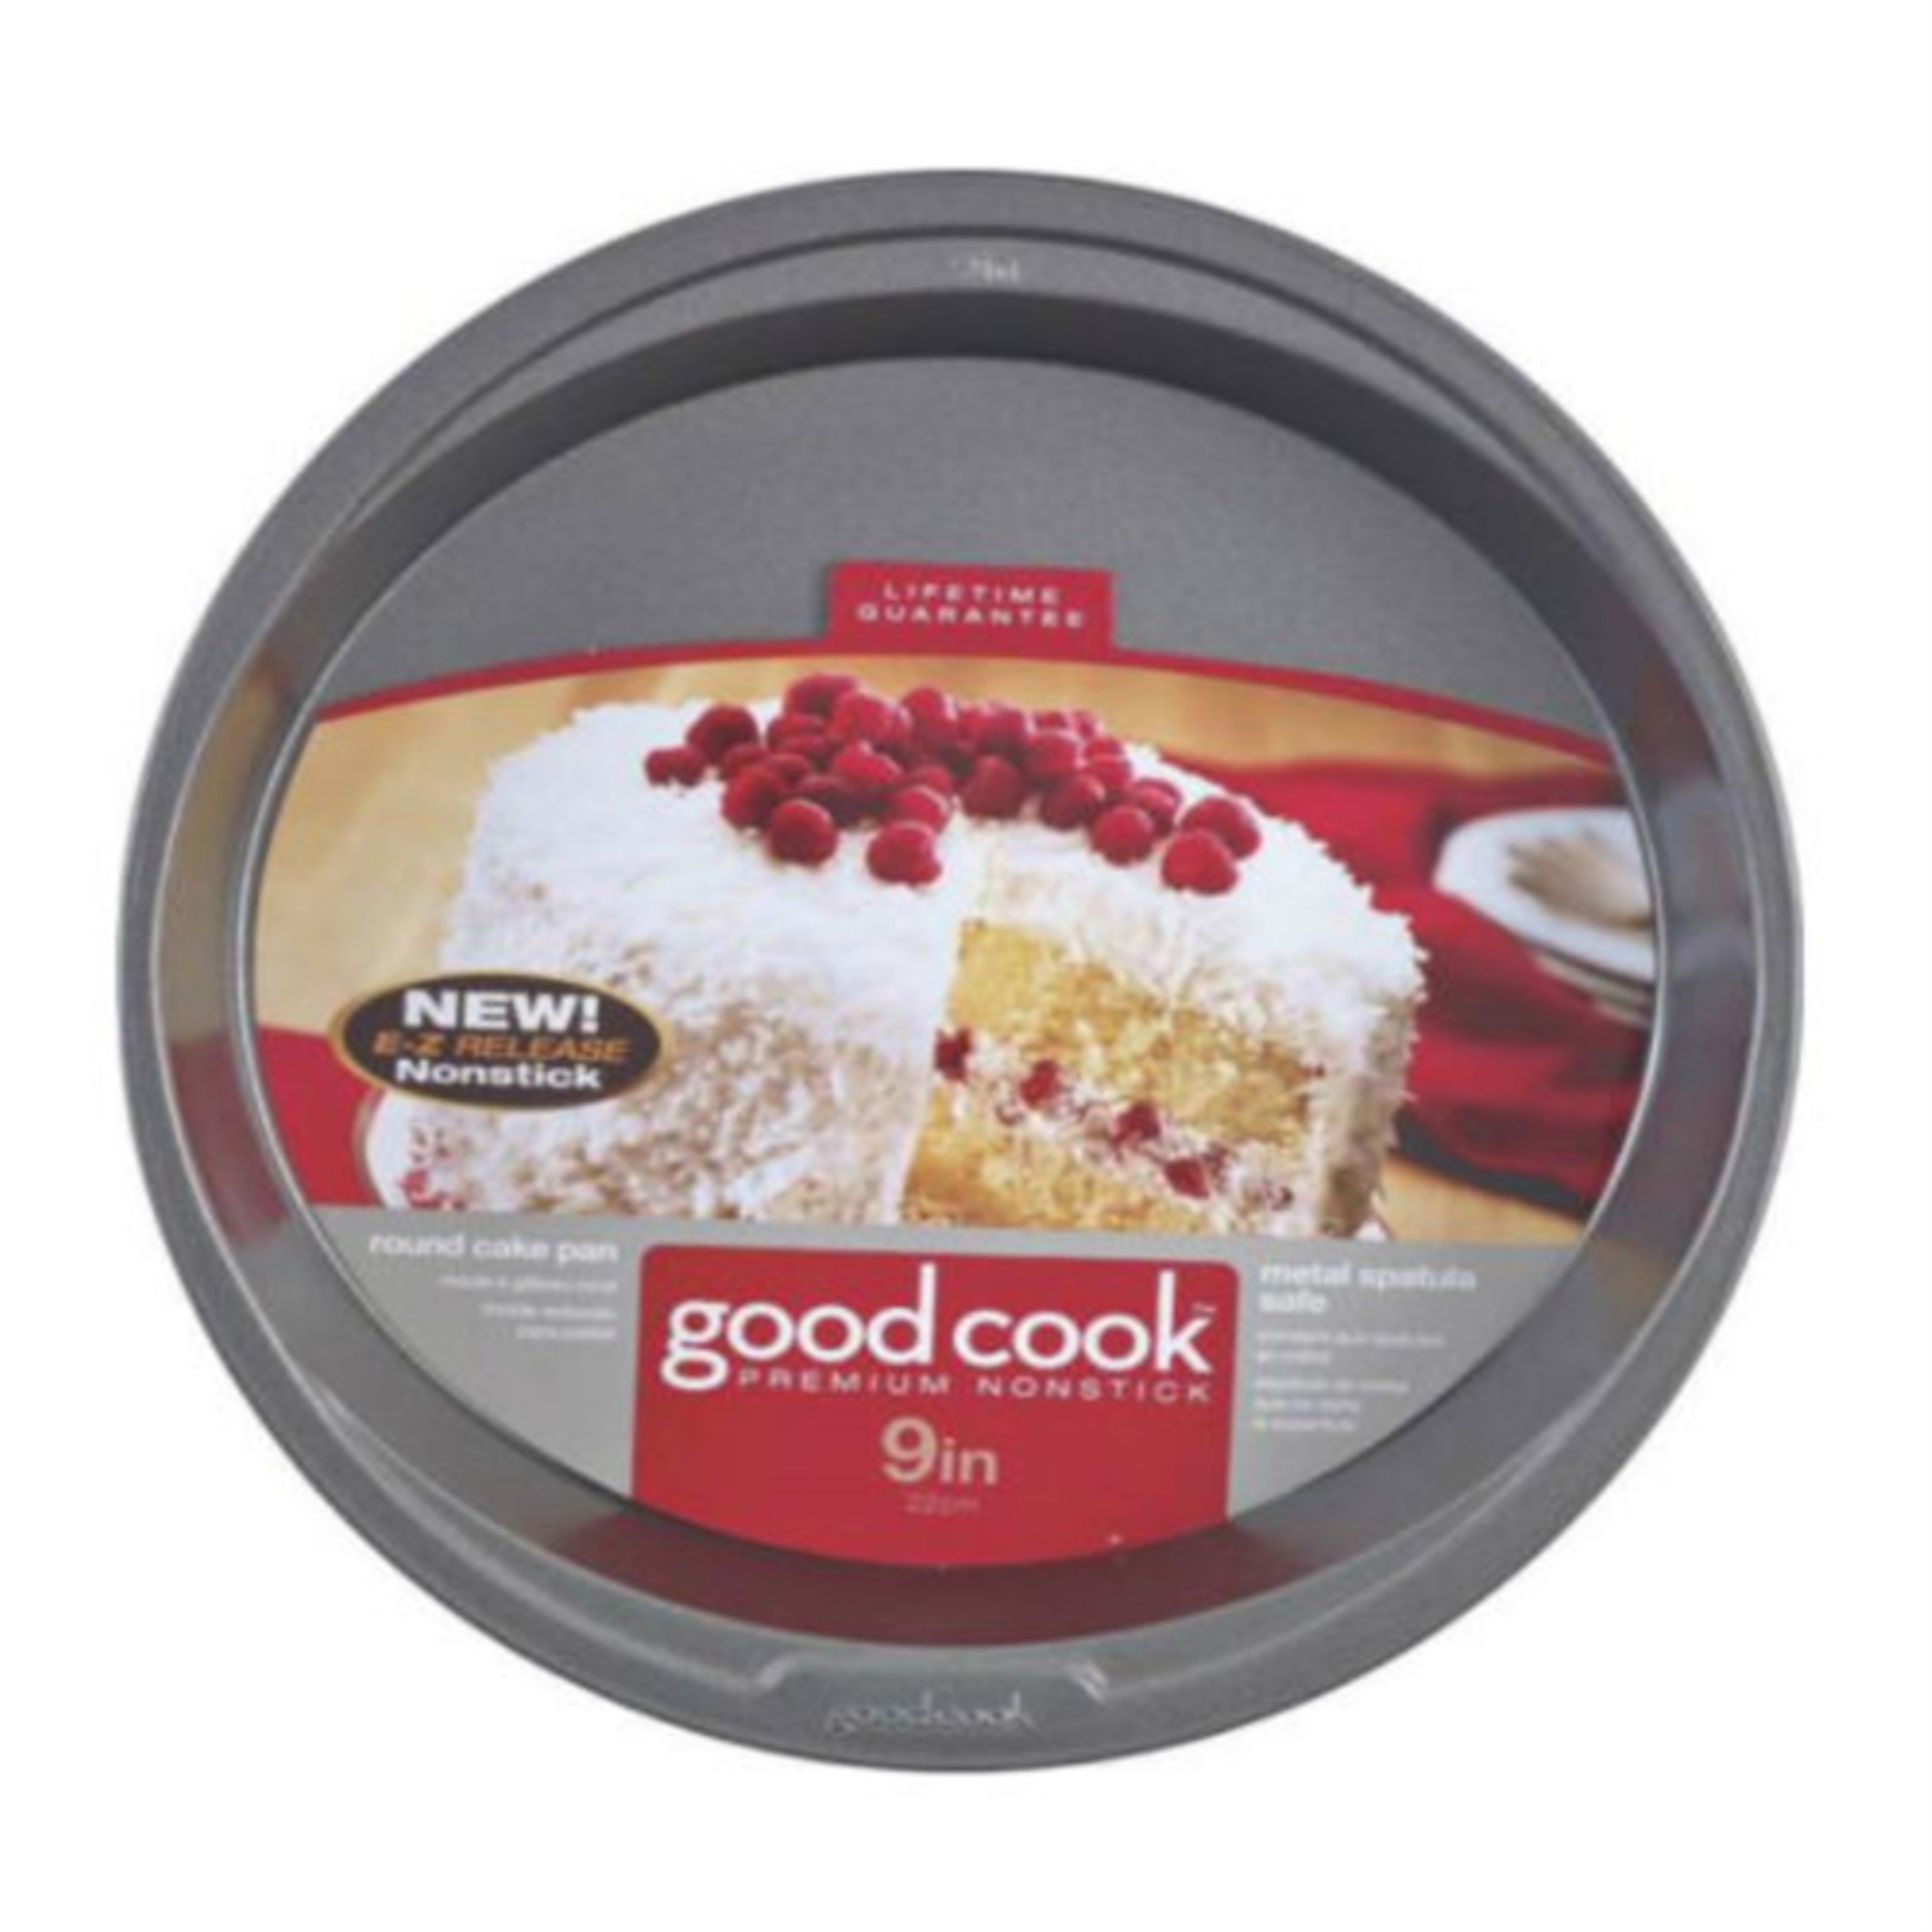 Good Cook 9 In. Round Non-Stick Cake Pan - image 1 of 2